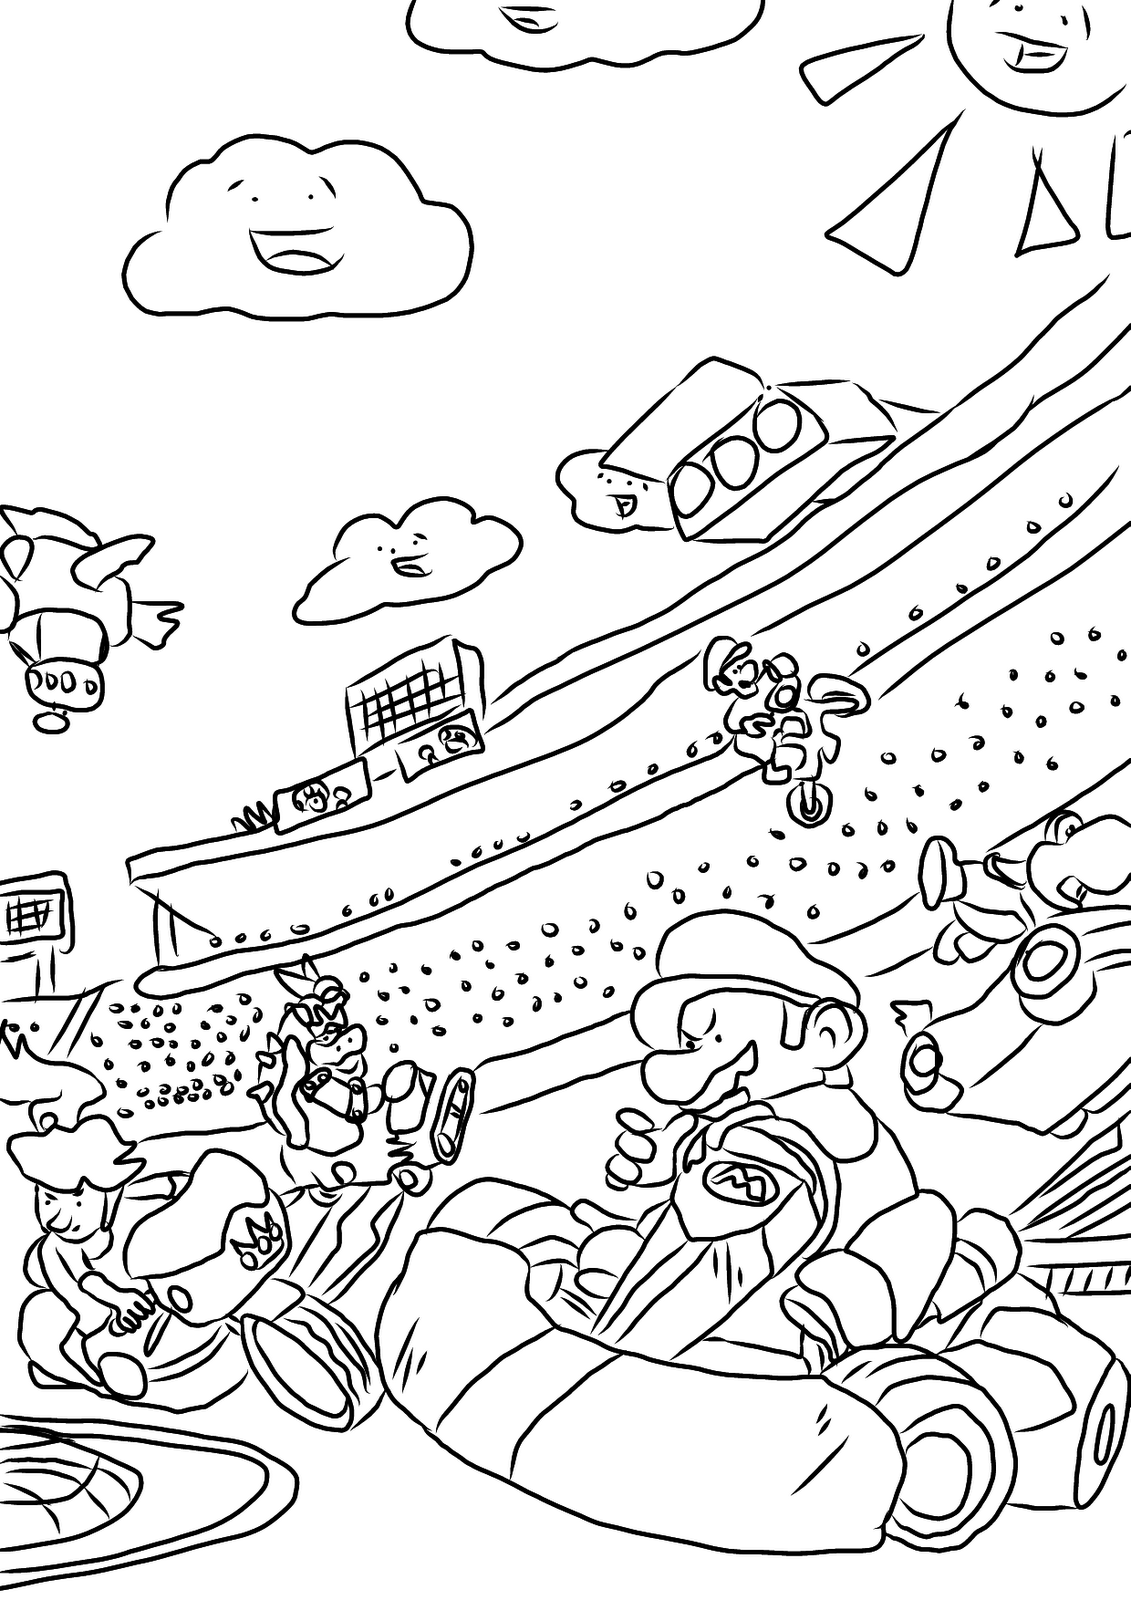 Download Favour in Fun: Mario Kart Colouring Pages